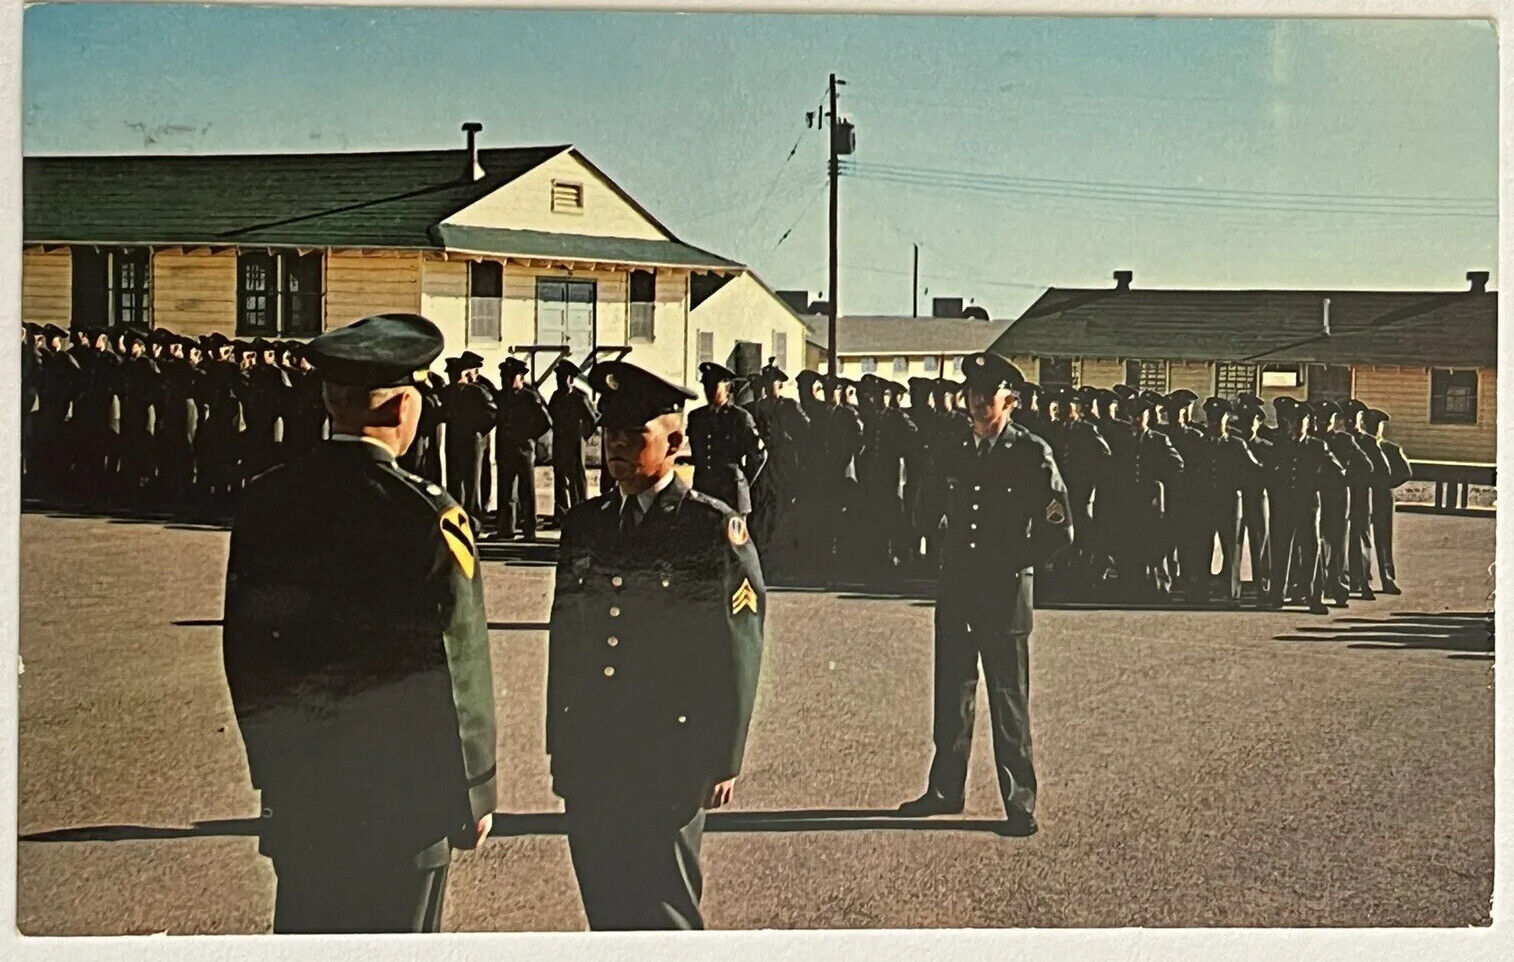 Fort Bliss Texas Military Review of Ranks Postcard c1960